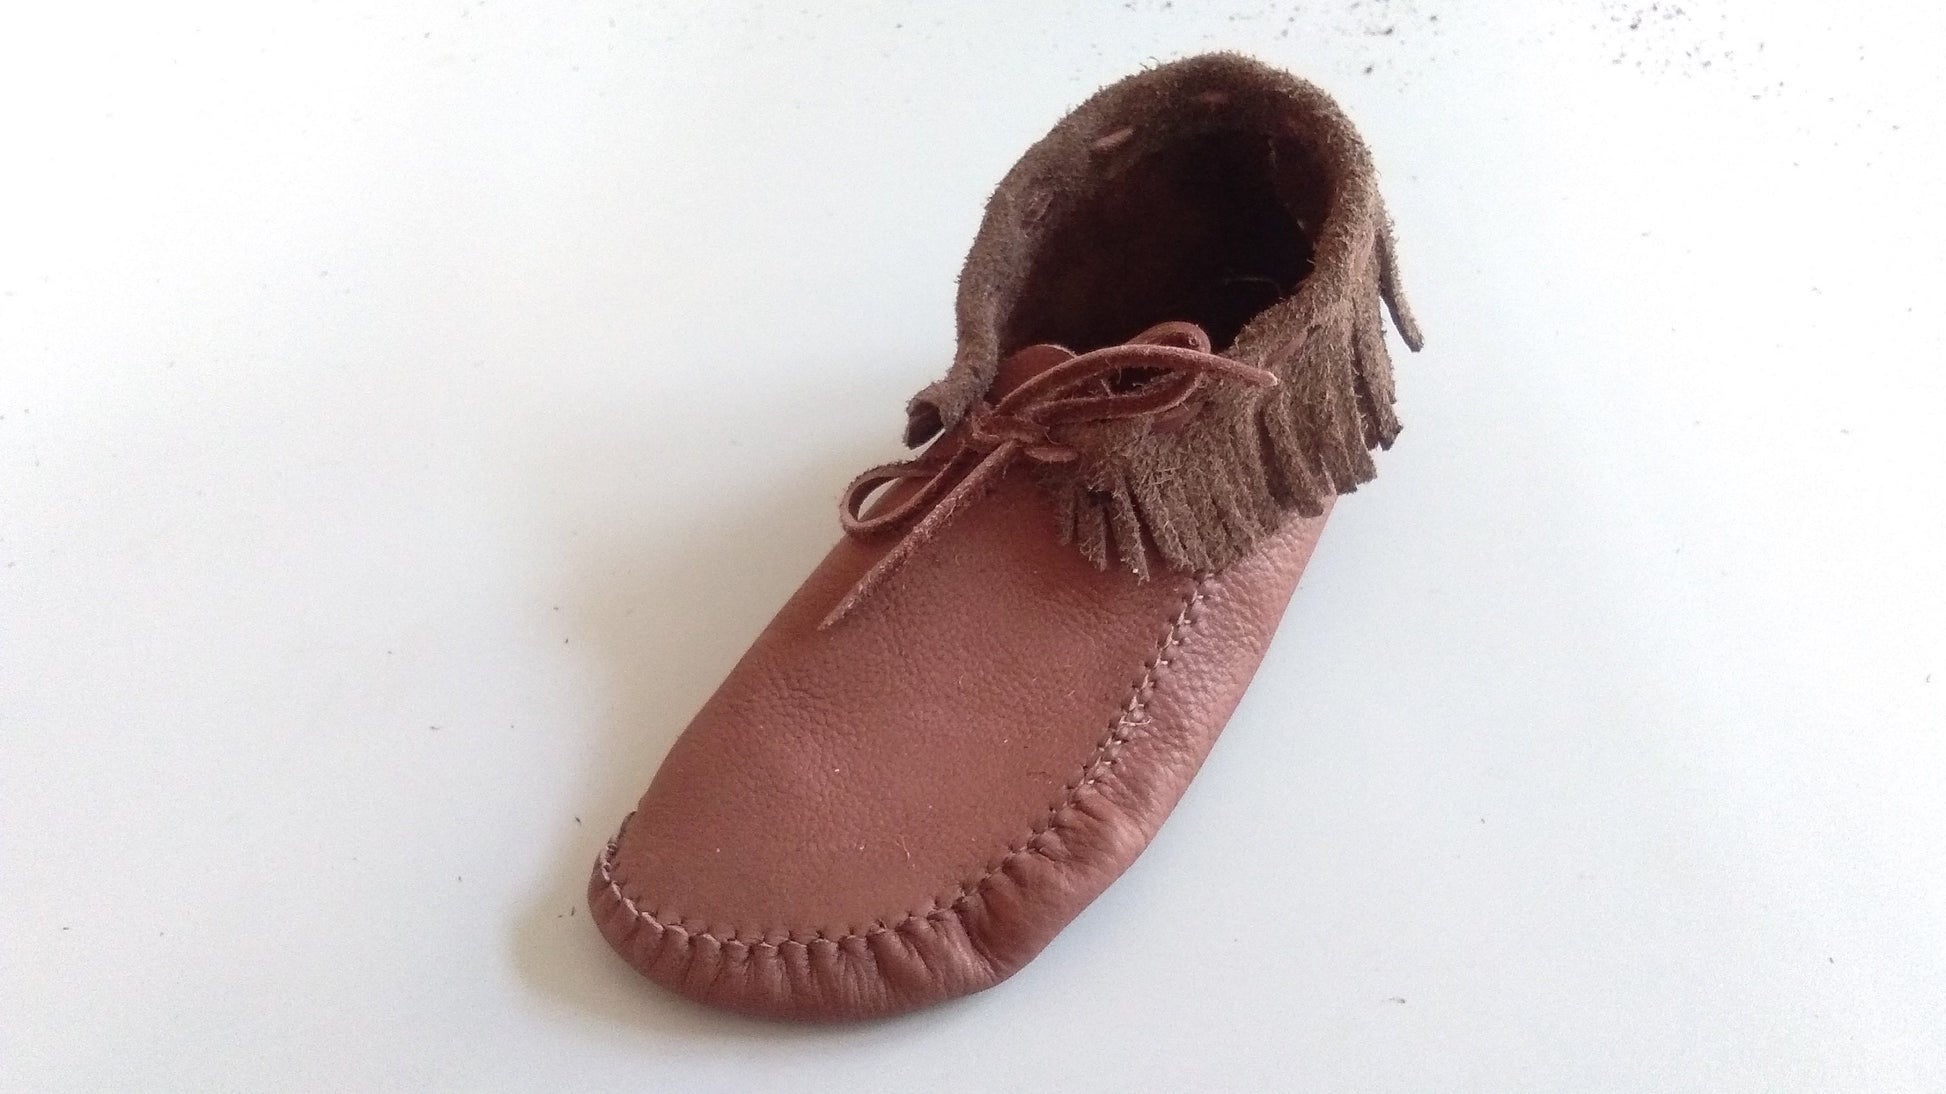 DIY Kit for  "The Base" - Low Boots Styles Earthingmoccasins